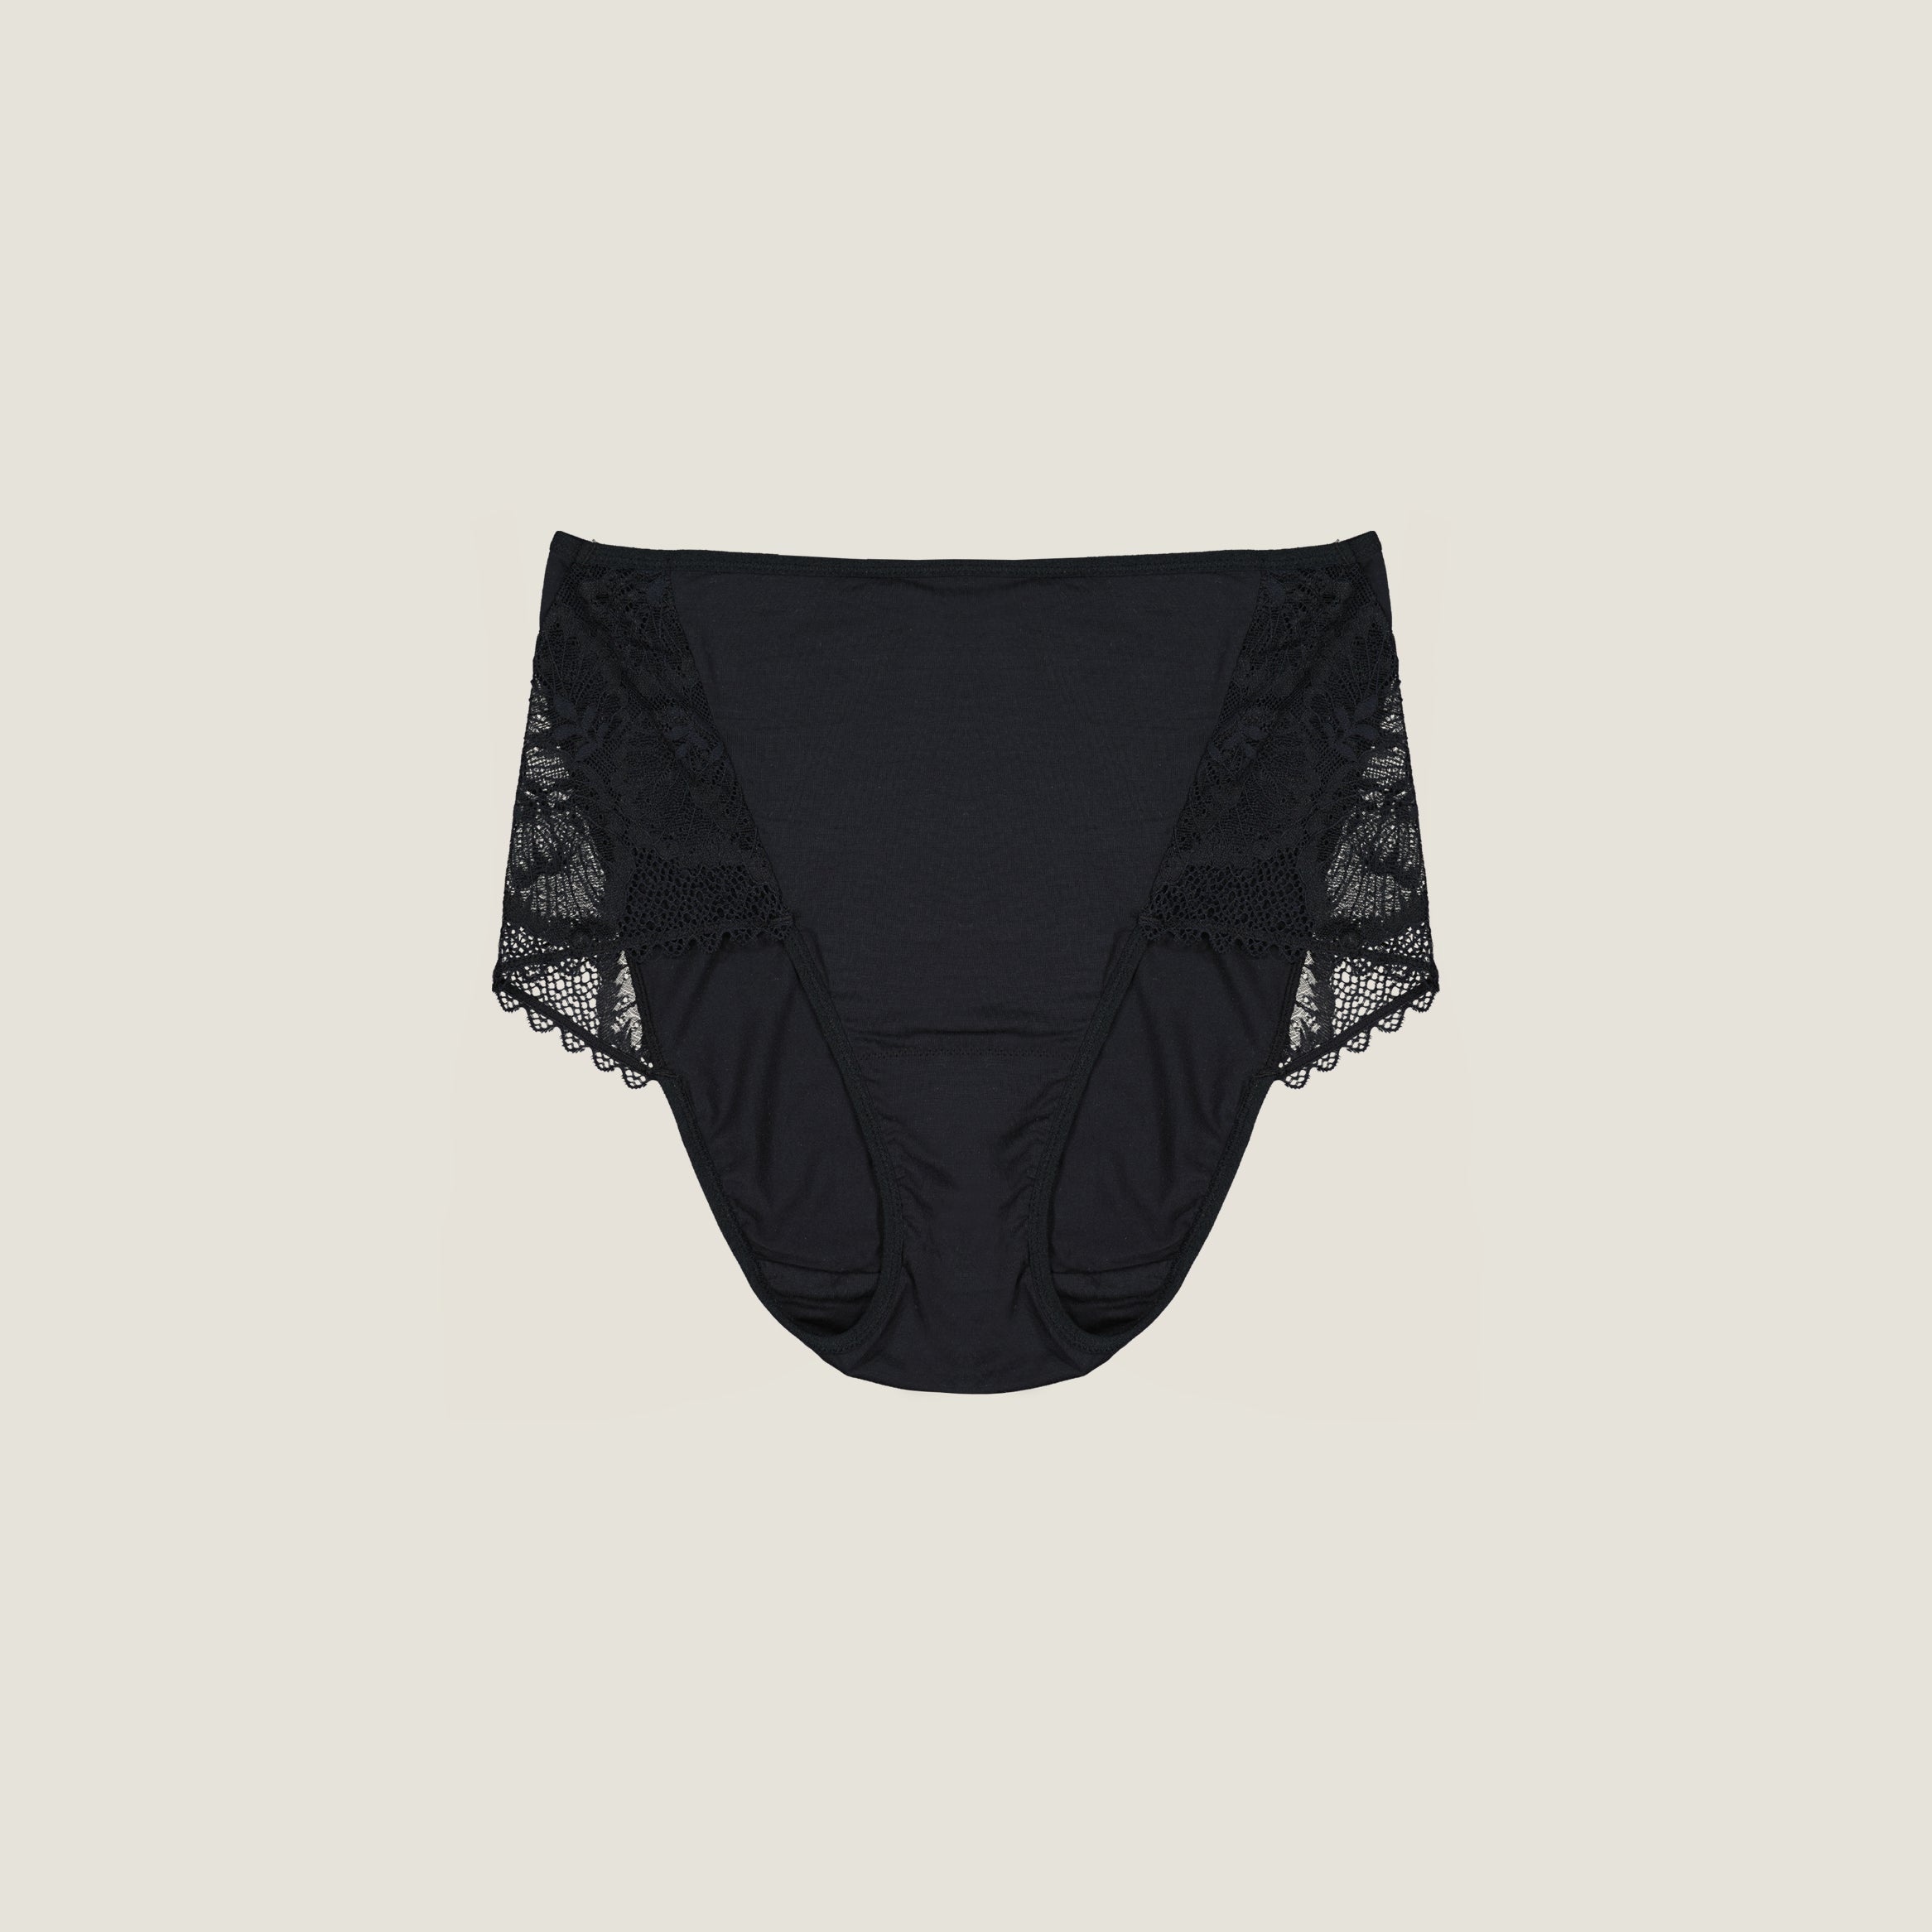 The Highrise Brief